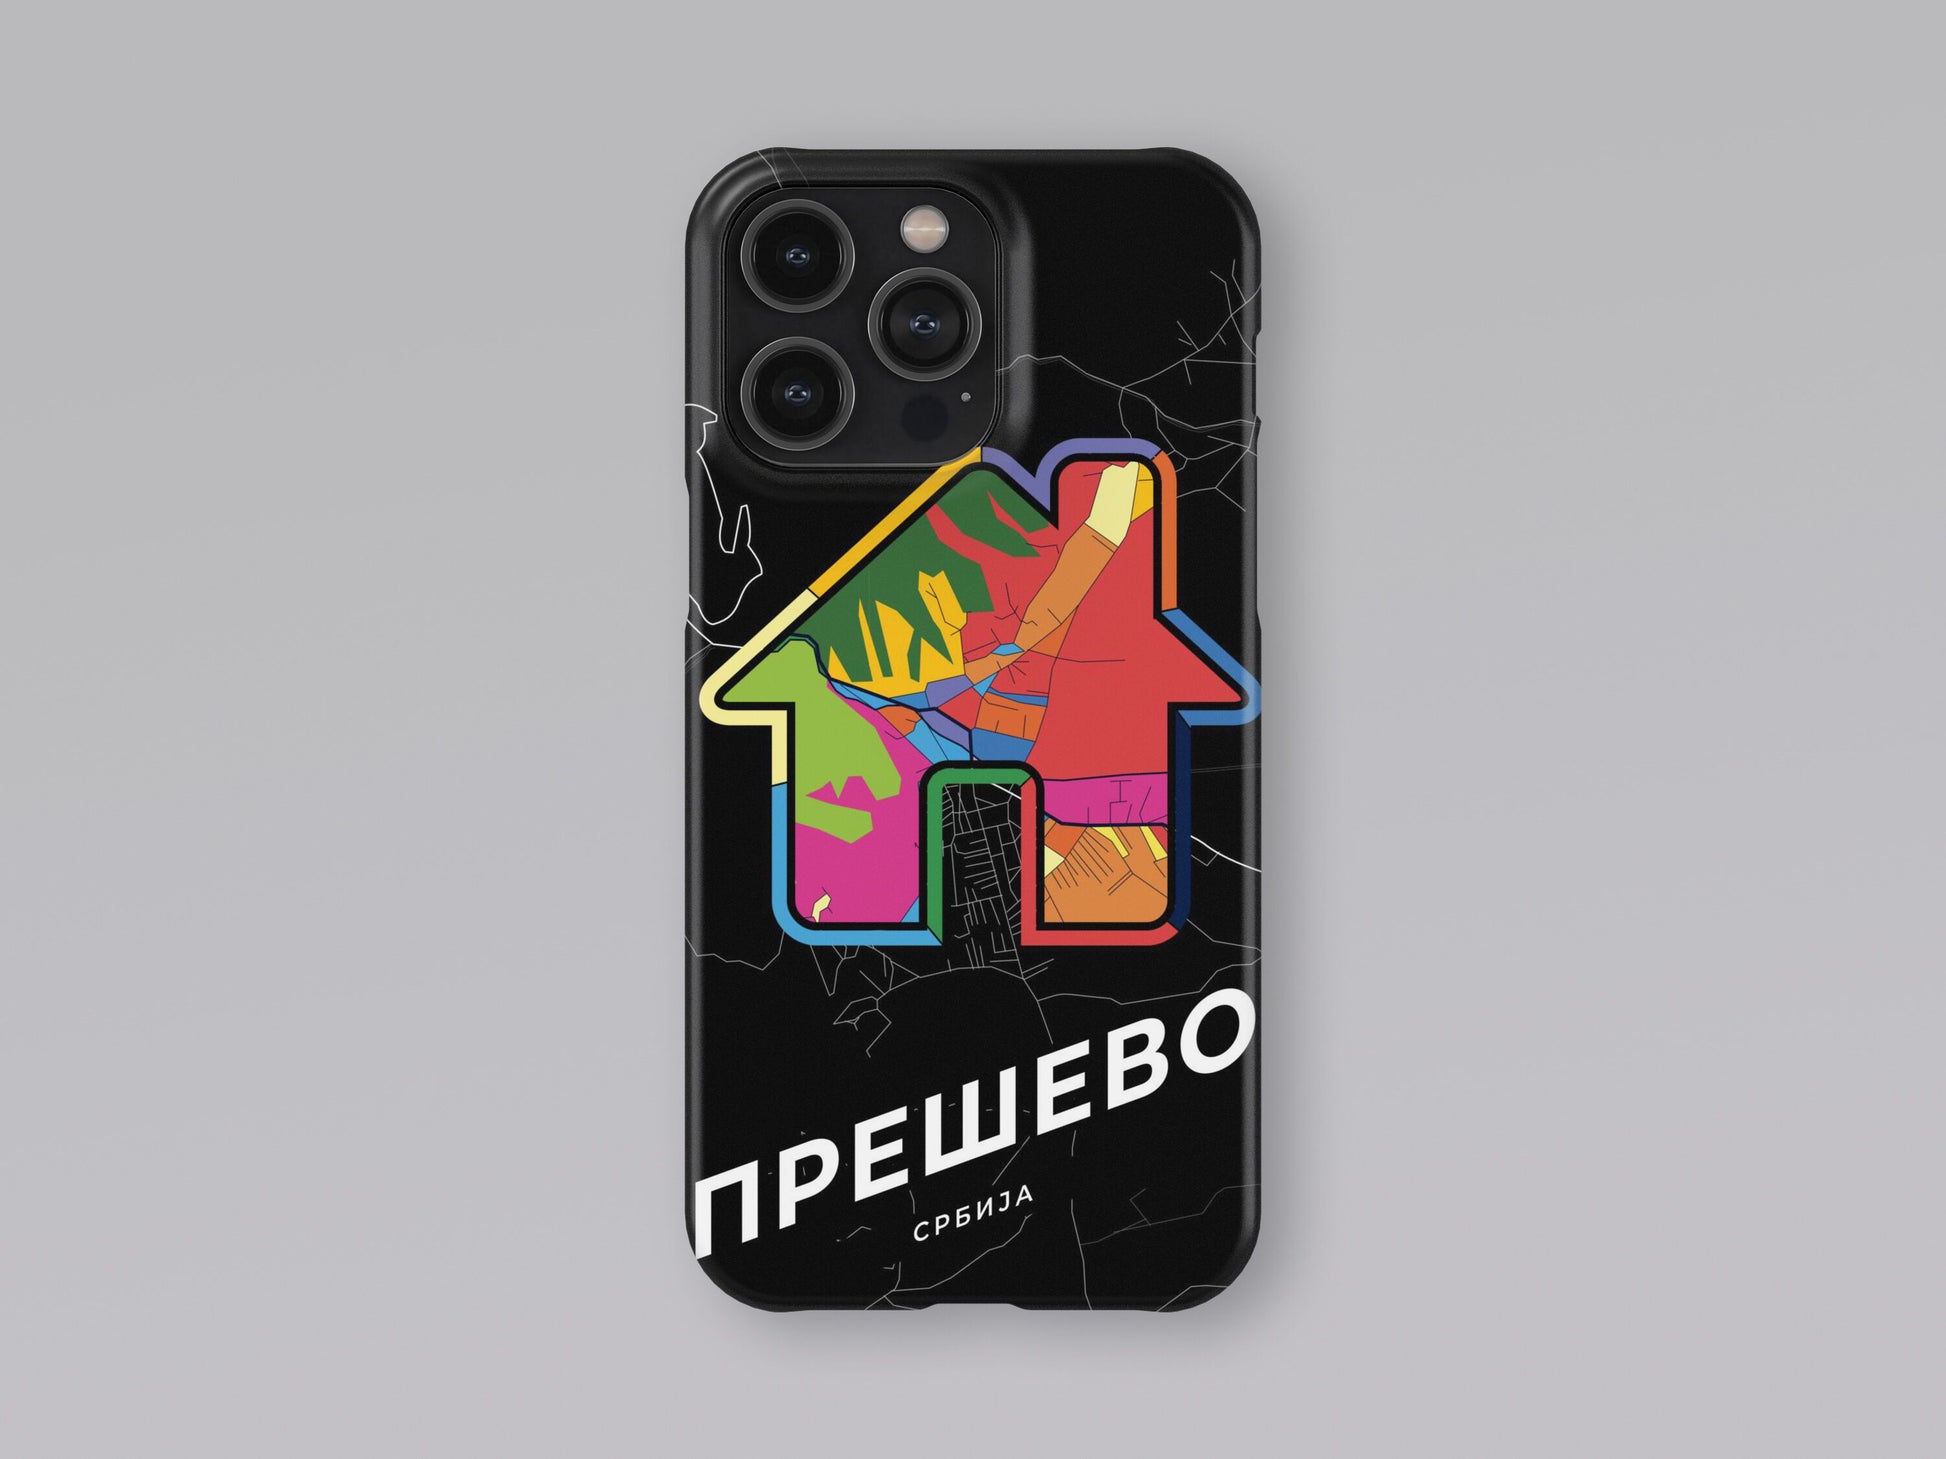 Preševo Serbia slim phone case with colorful icon. Birthday, wedding or housewarming gift. Couple match cases. 3